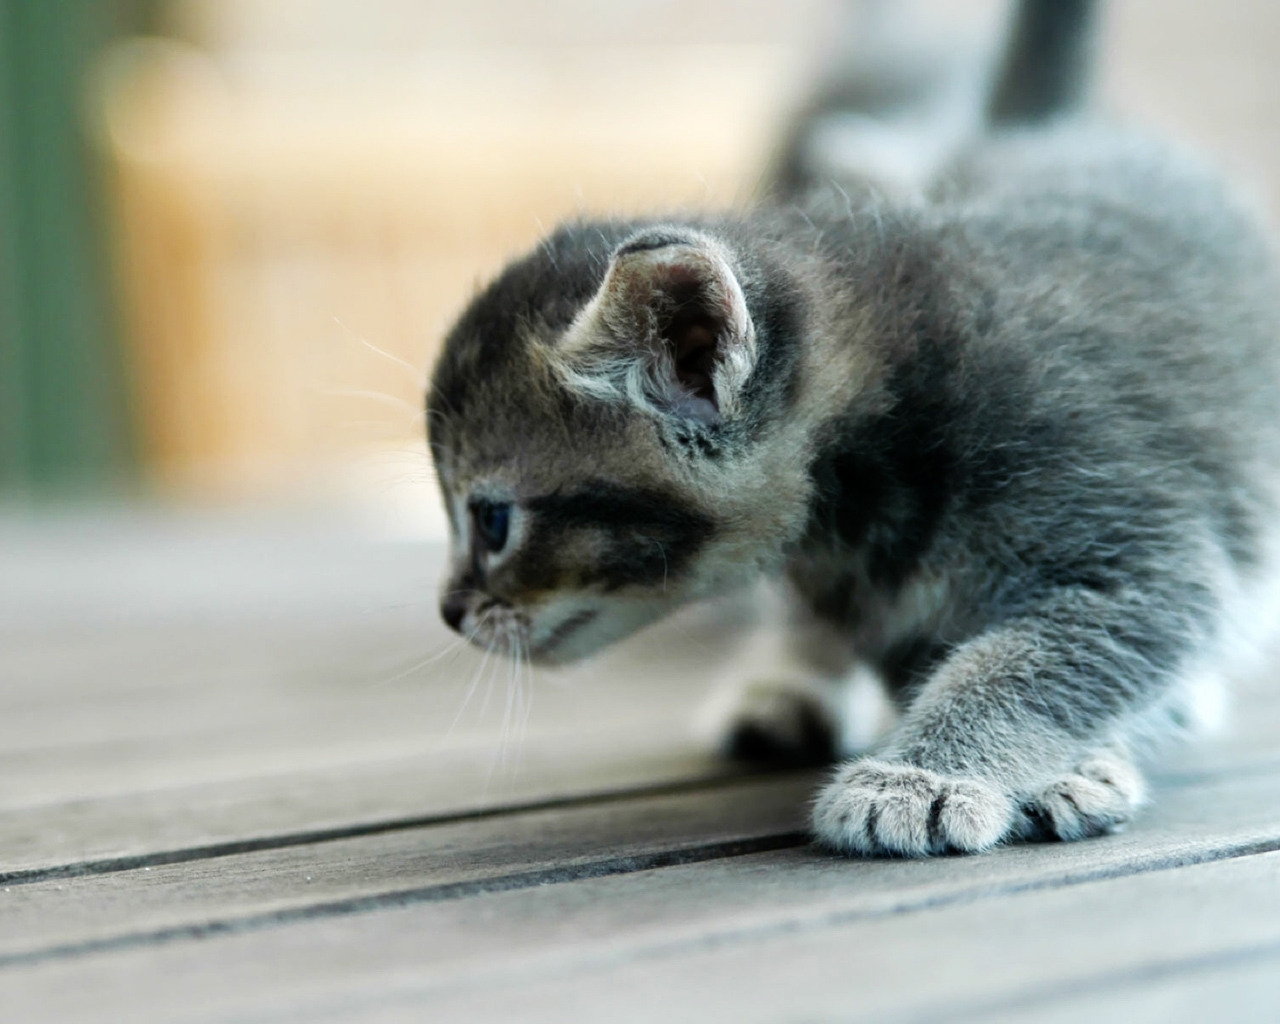 Small kitty for 1280 x 1024 resolution